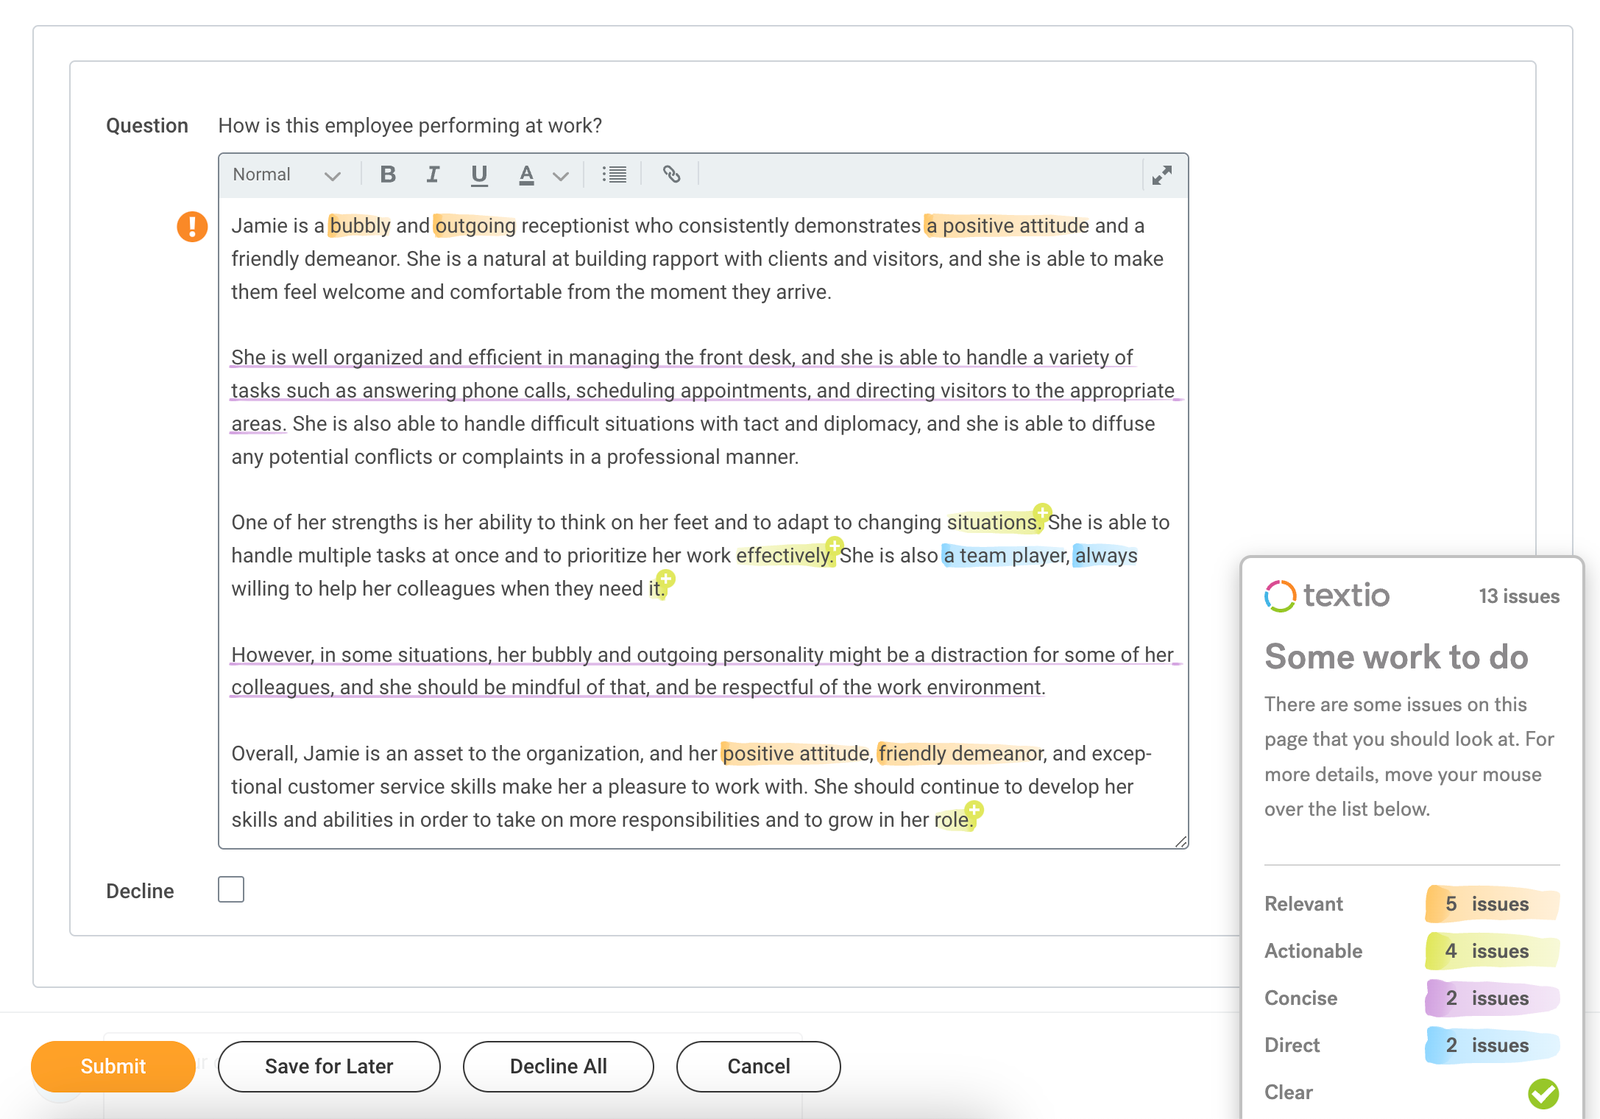 Textio guidance on copy from ChatGPT